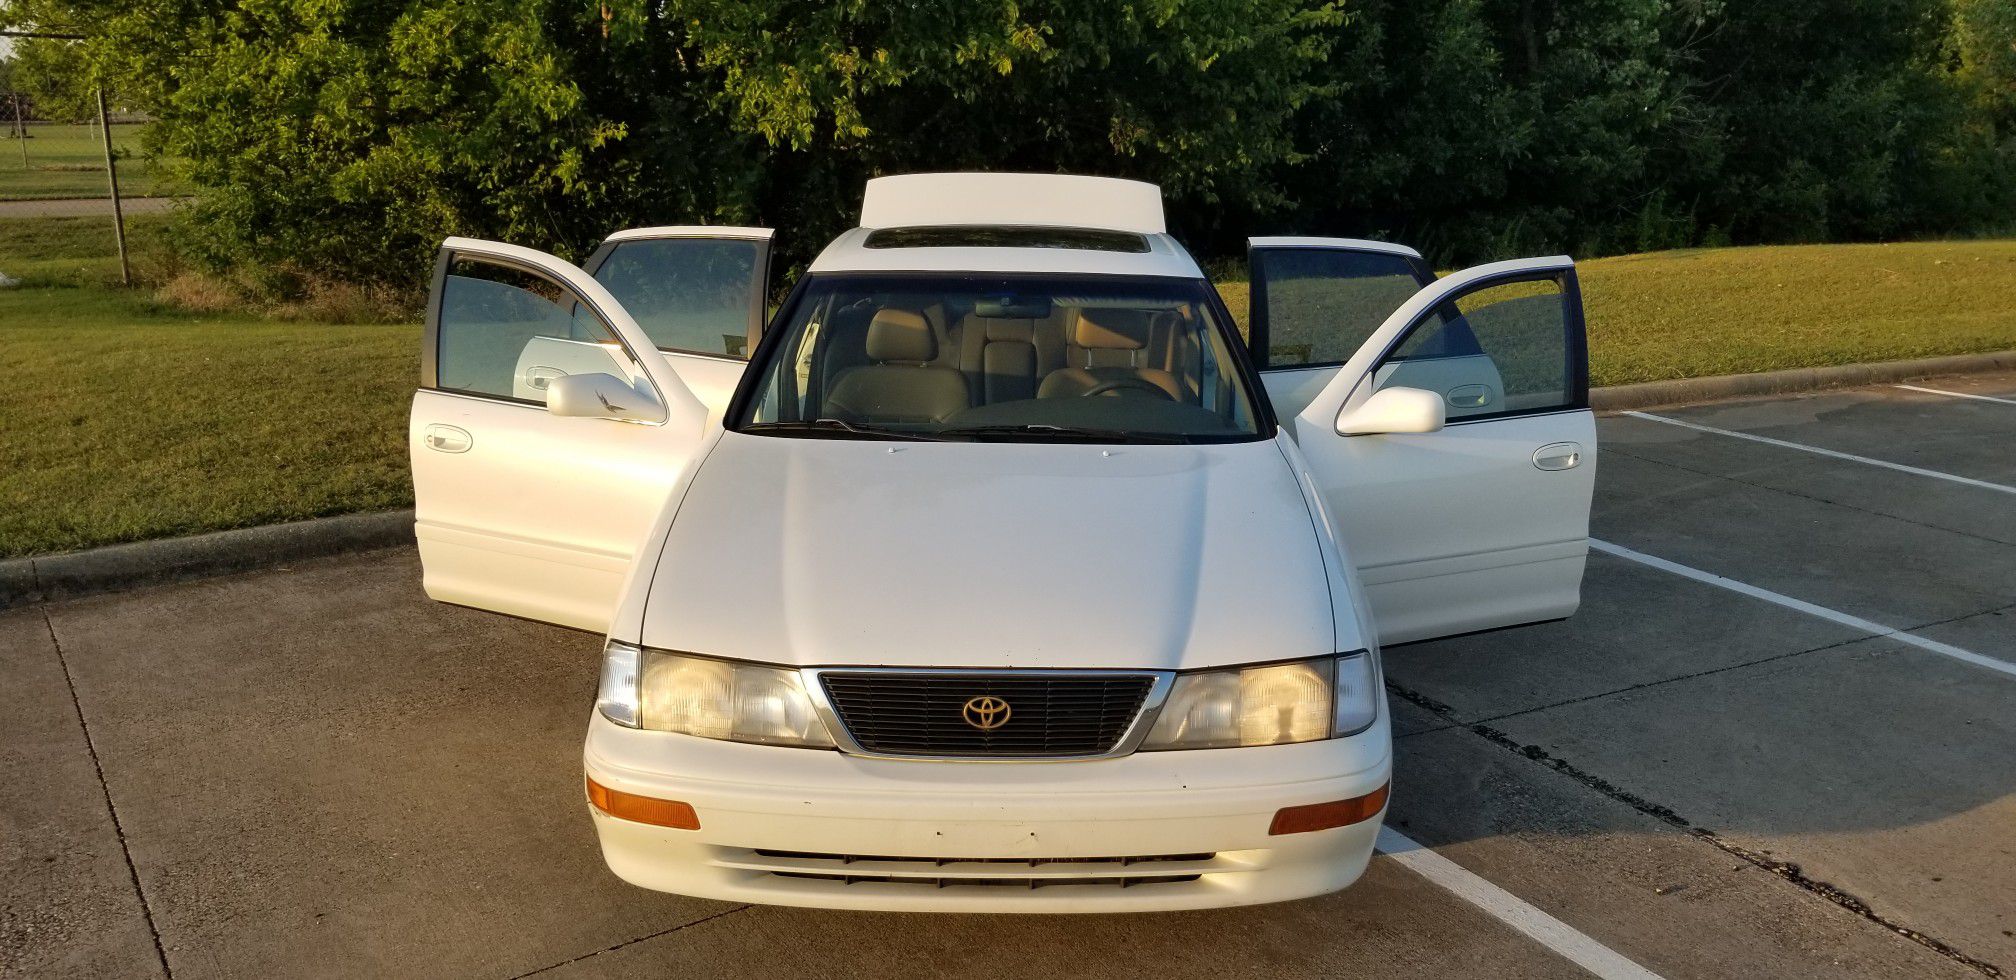 1997 Toyota Avalon XLS in Excellent condition